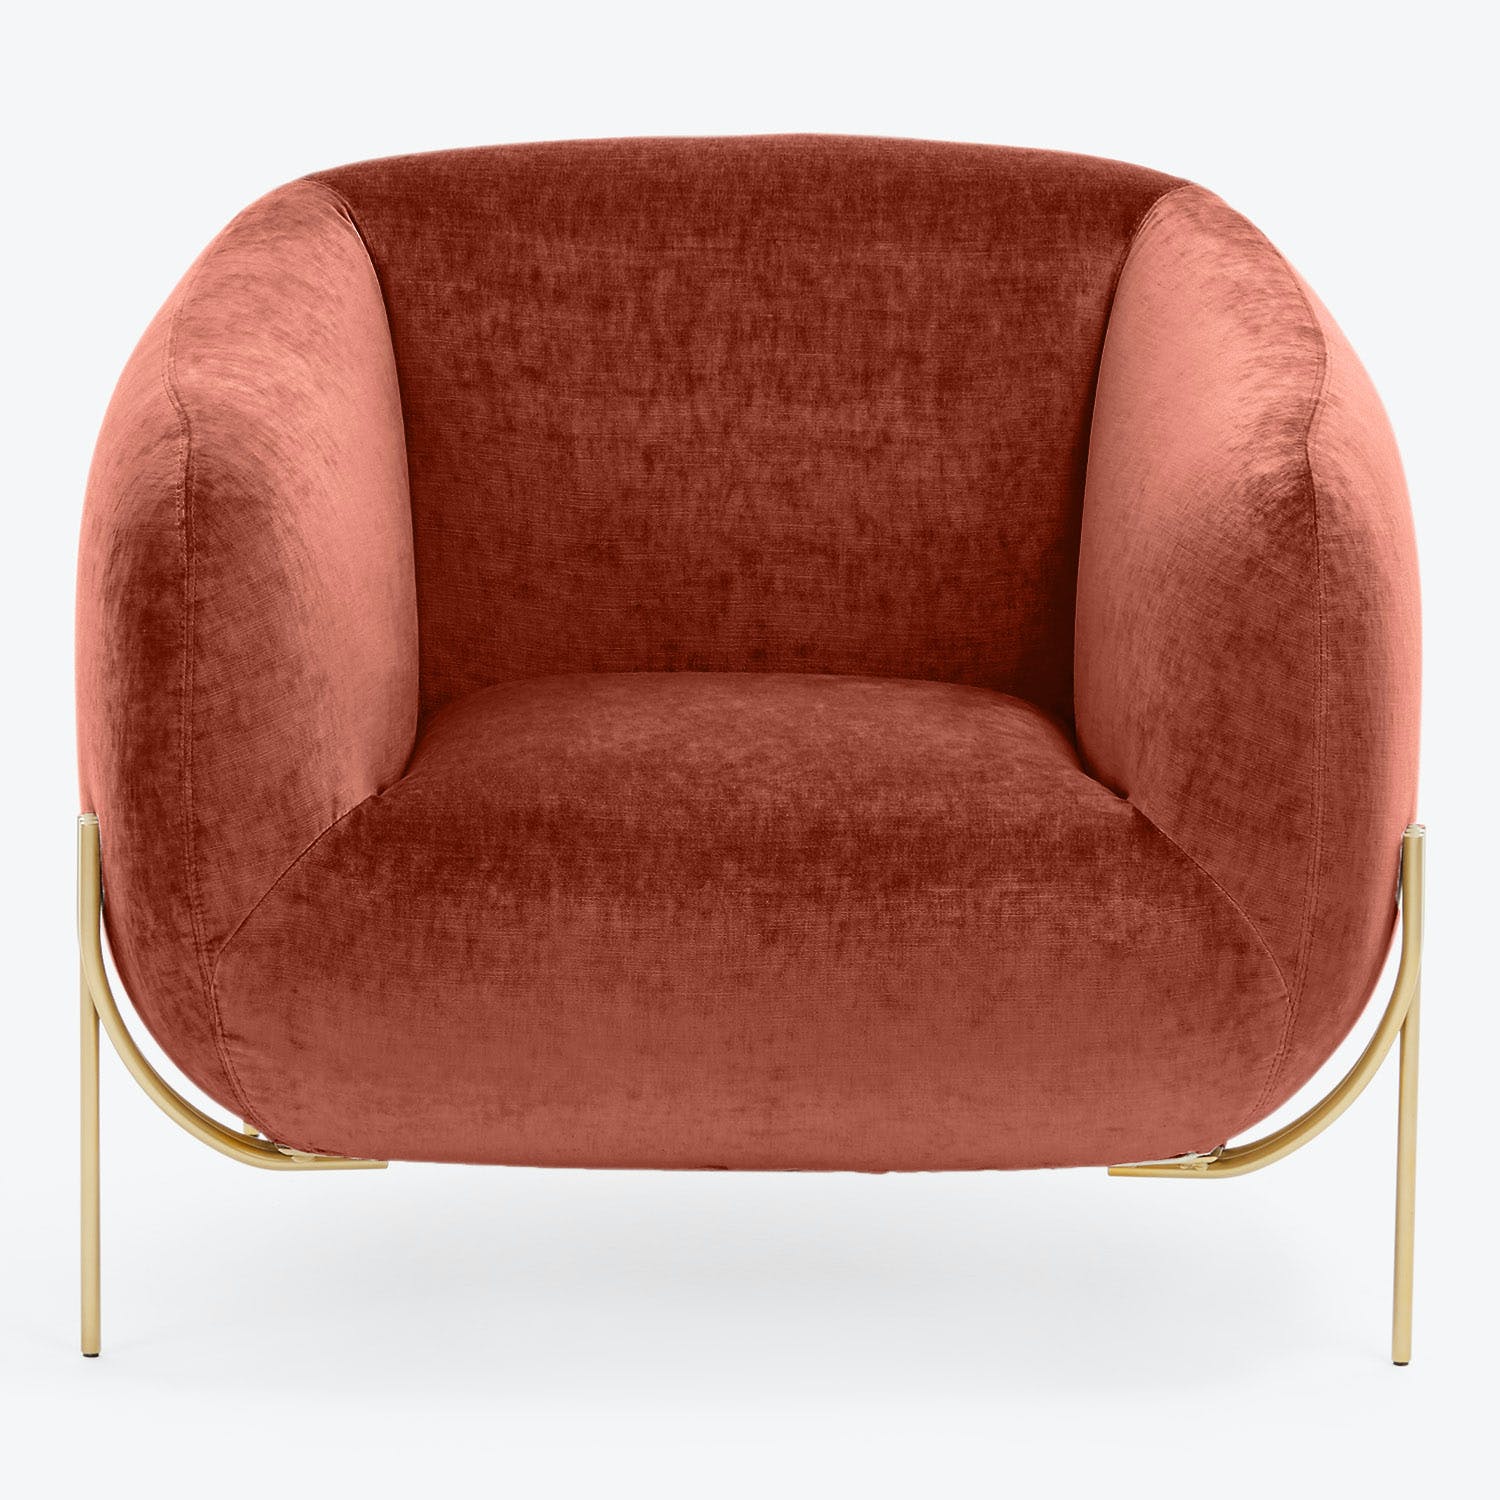 Modern armchair with curved silhouette and plush dusty rose upholstery.